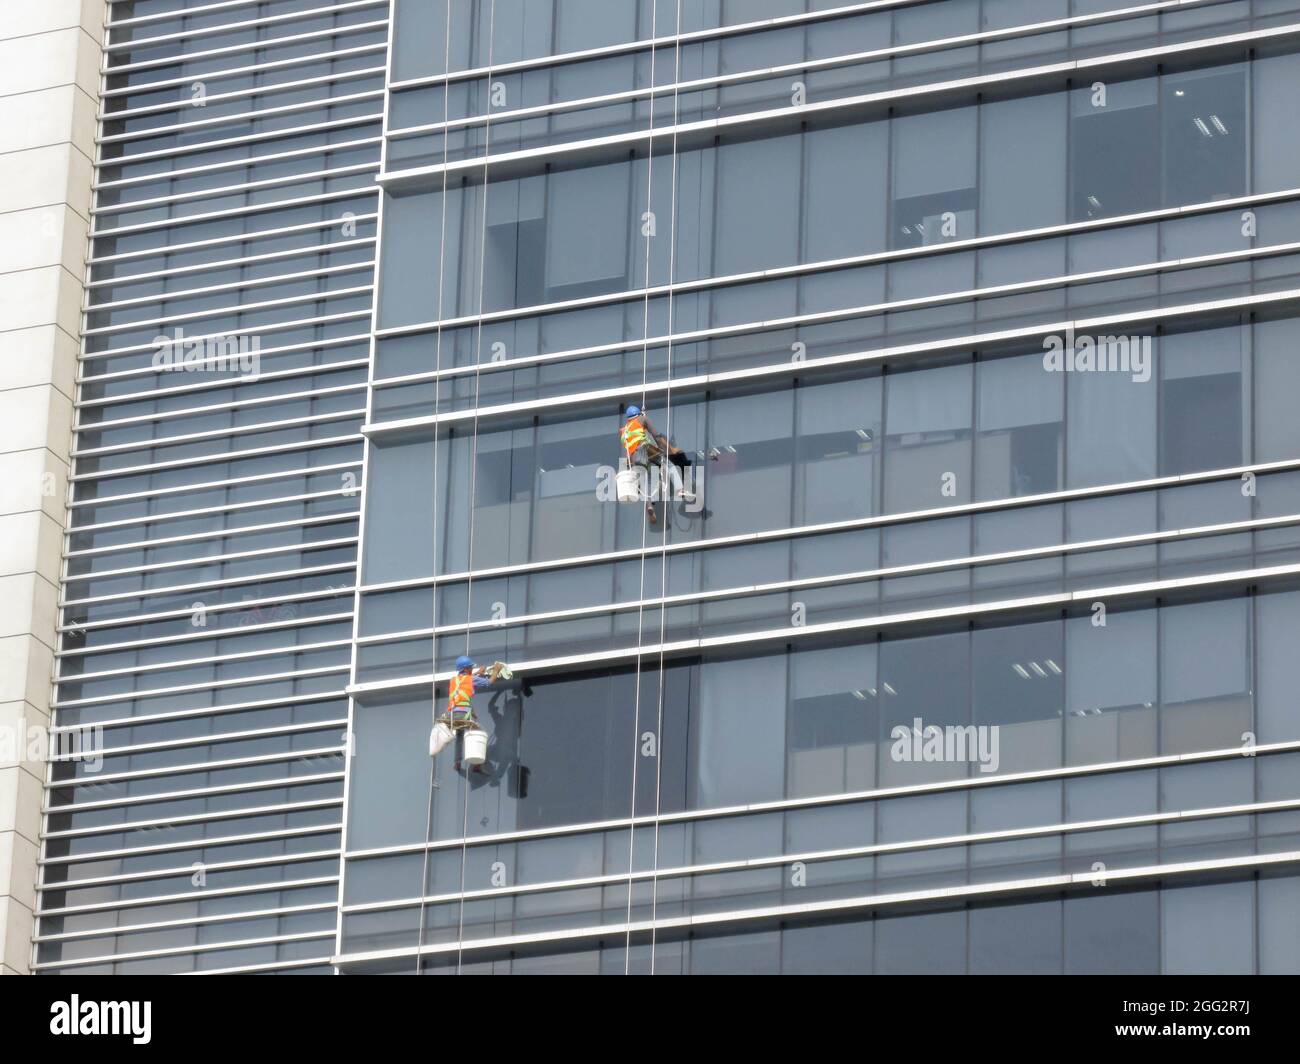 Ho Chi Minh, Vietnam - February 28, 2017: 2 workers are cleaning the outside glass of a high-rise building Stock Photo